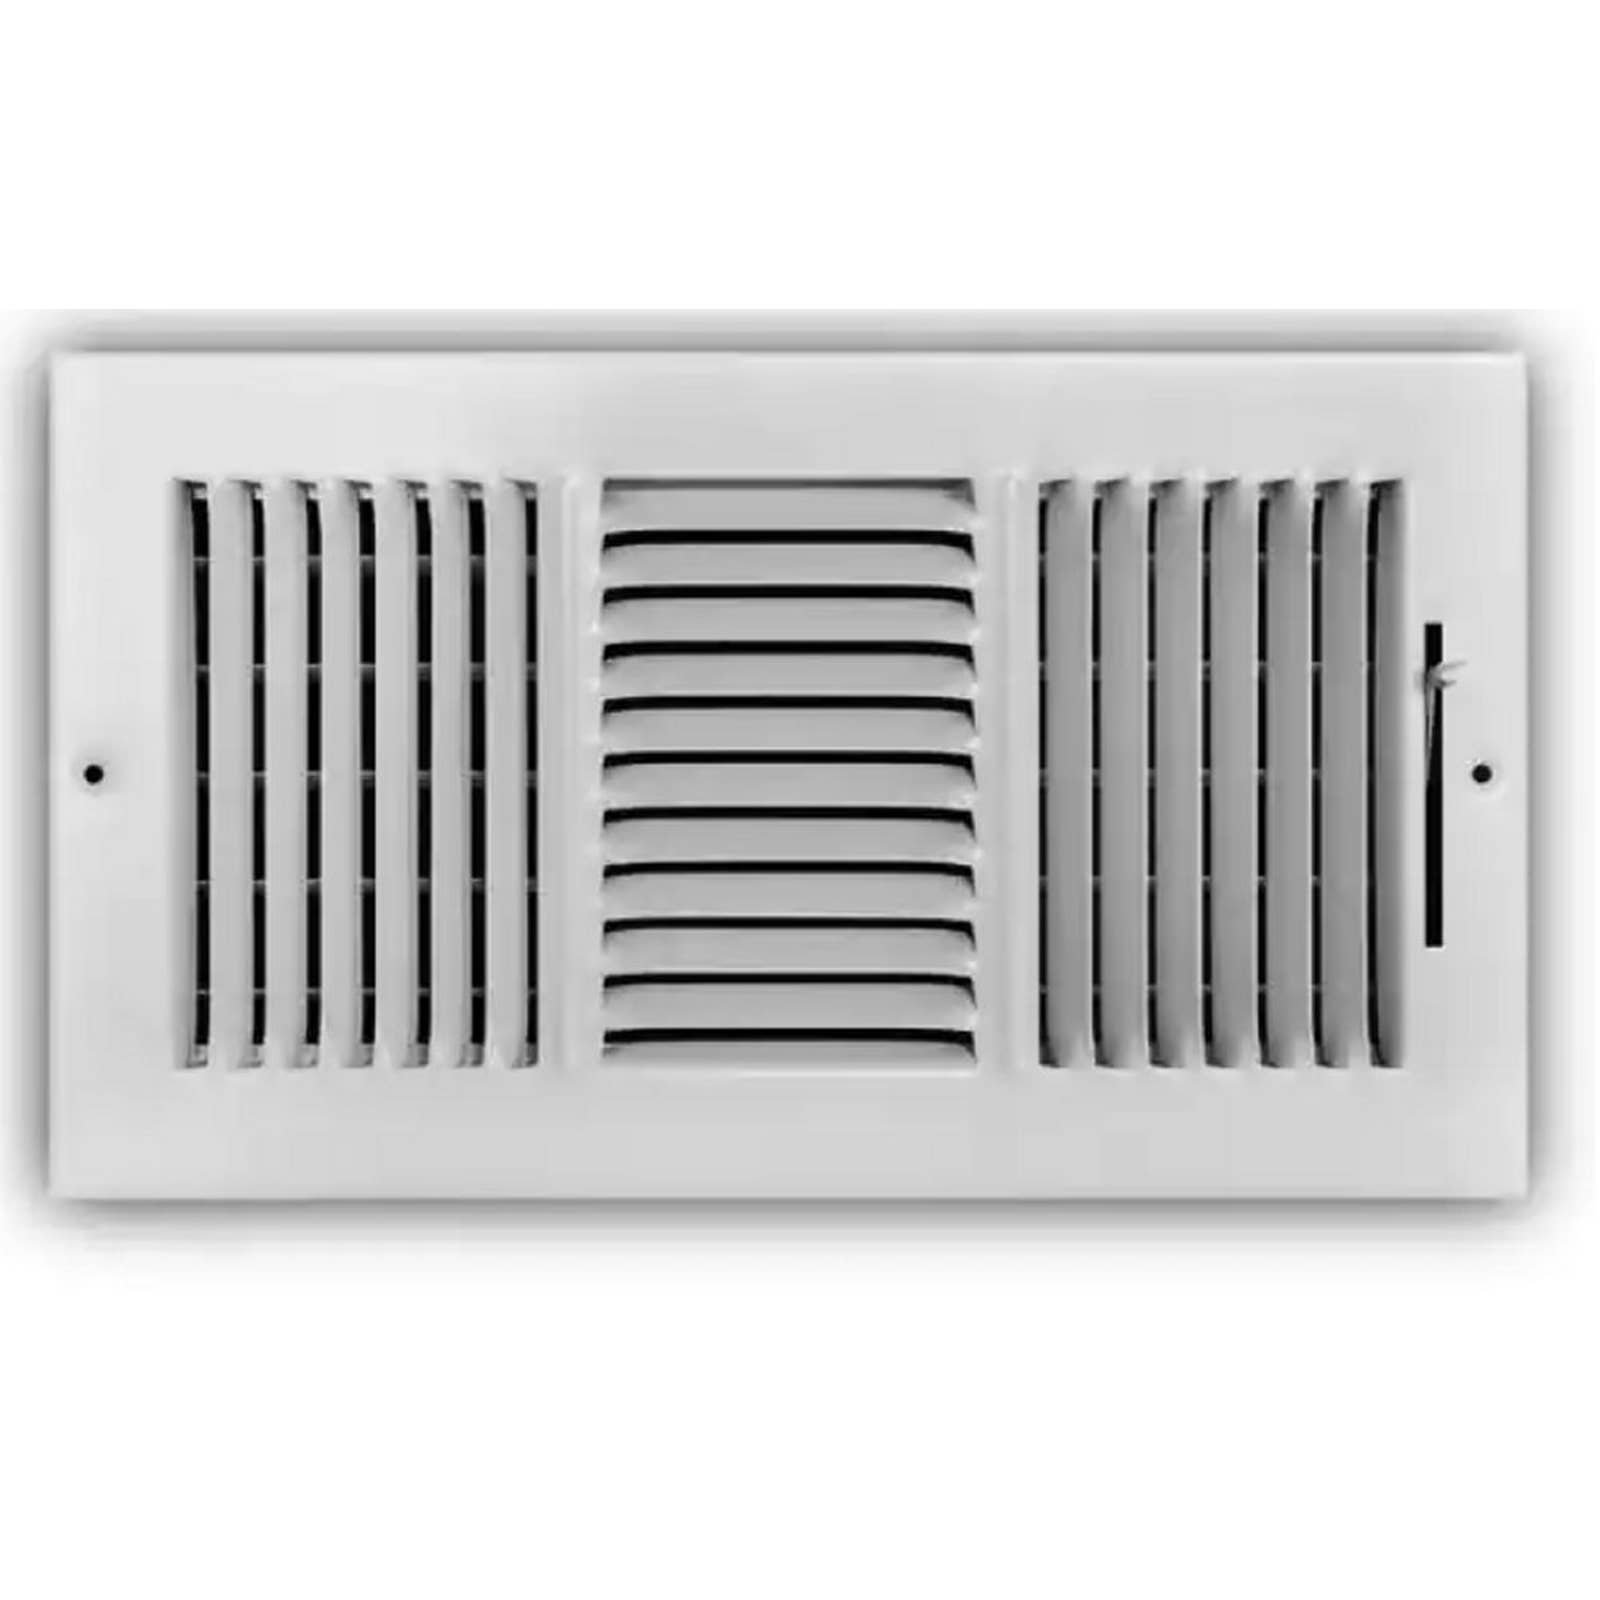 12 in. x 6 in. 3-Way Steel Wall or Ceiling Register Vent, White - Free Shipping G4MQShi9I